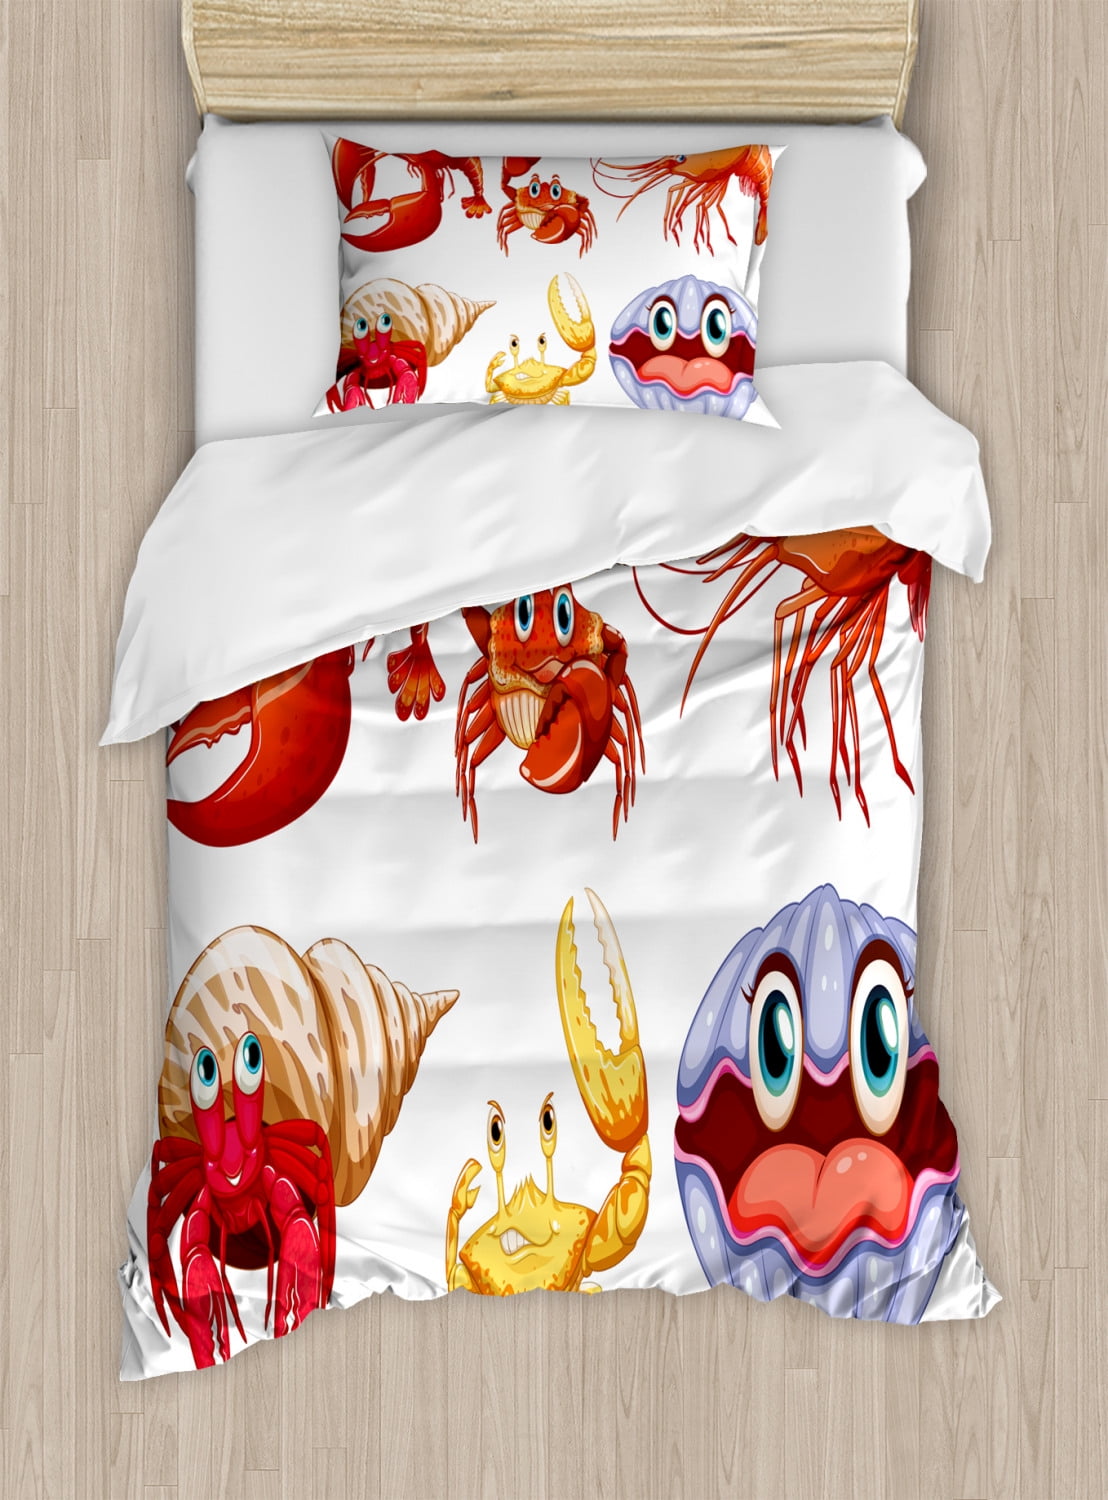 Colorful Shrimps Flannel Blanket Christmas Blanket Bedding Three Sizes Suitable for Anyone